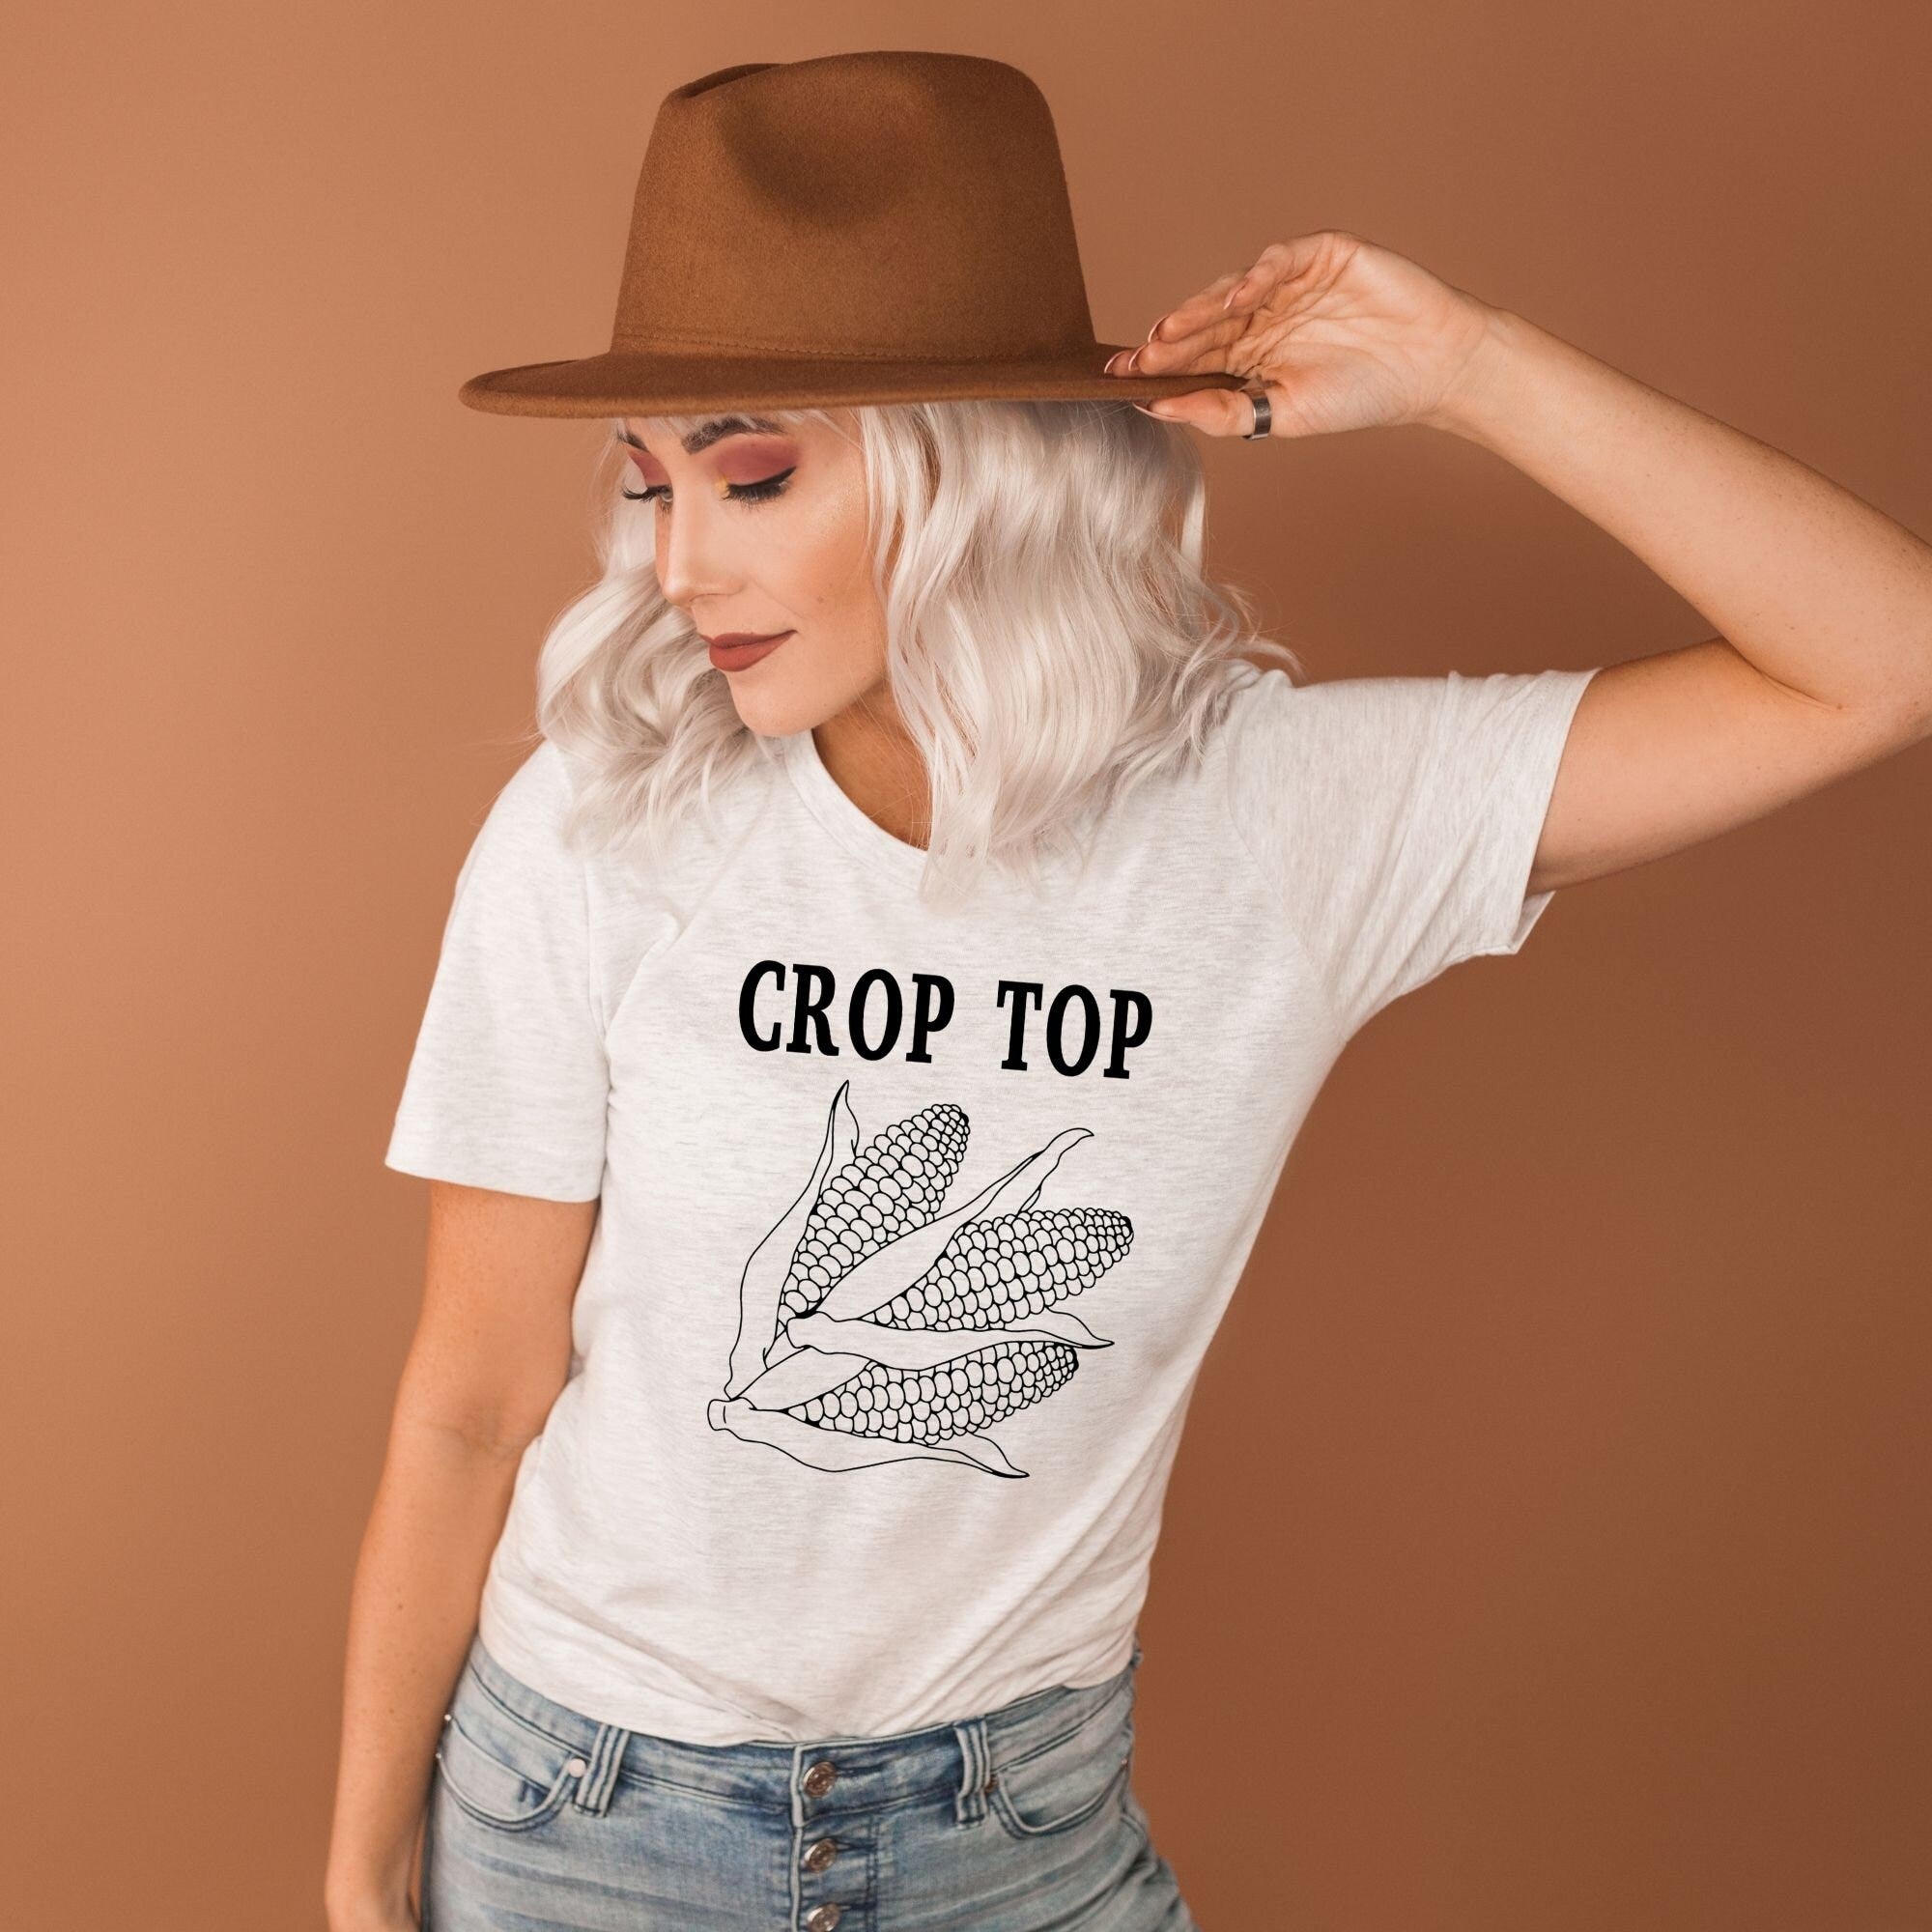 Funny Crop Top Graphic Tee for Women *UNISEX FIT*-208 Tees Wholesale, Idaho